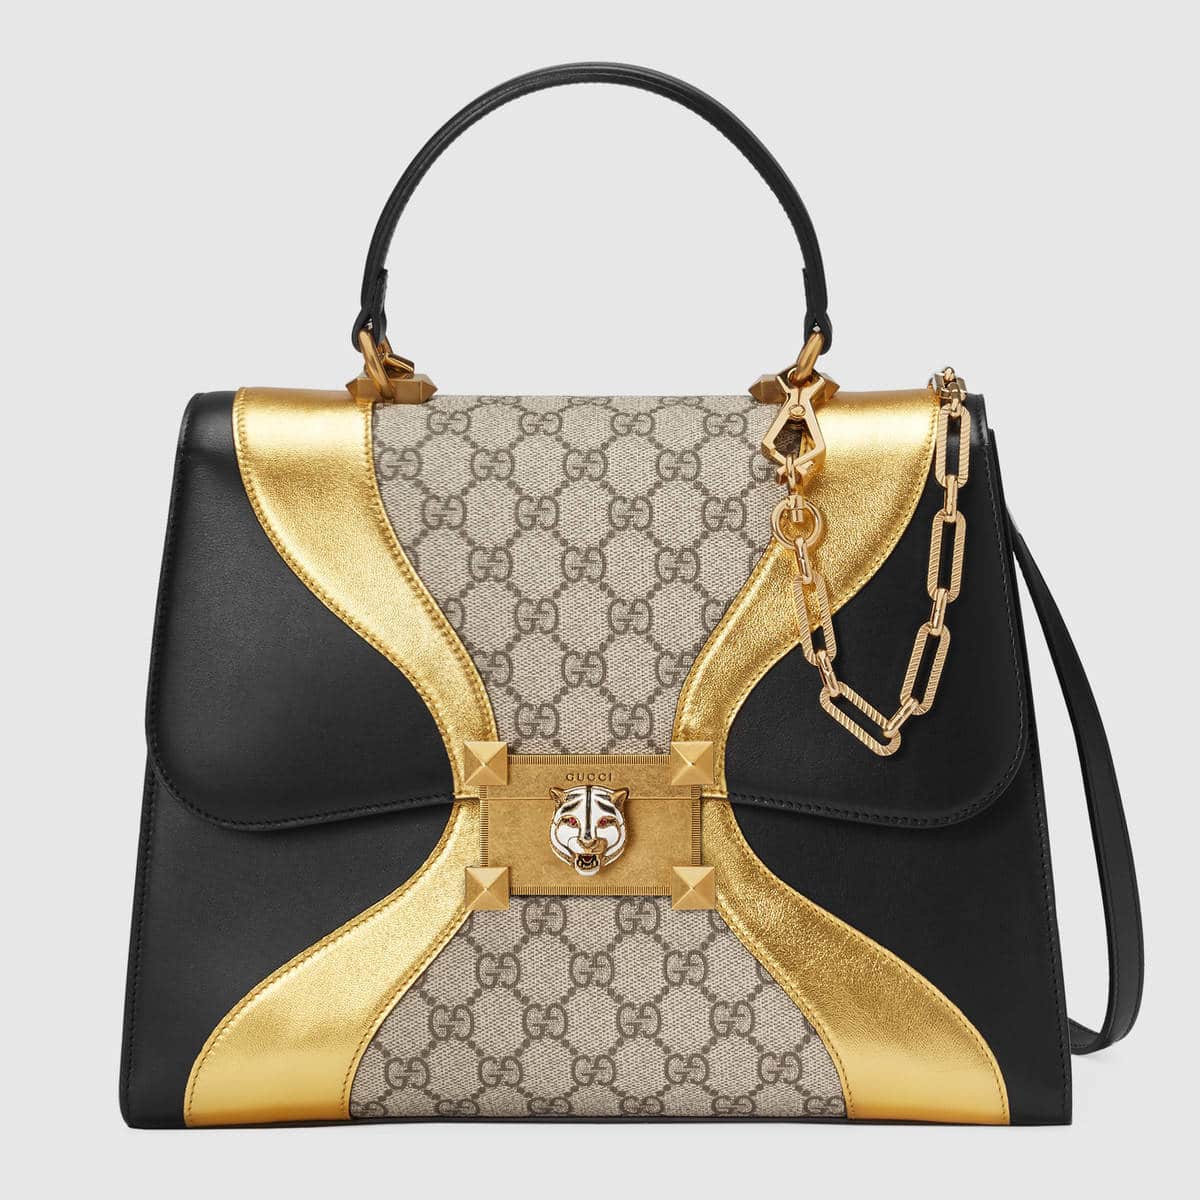 Europe Gucci Bag Price List Reference Guide – Spotted Fashion